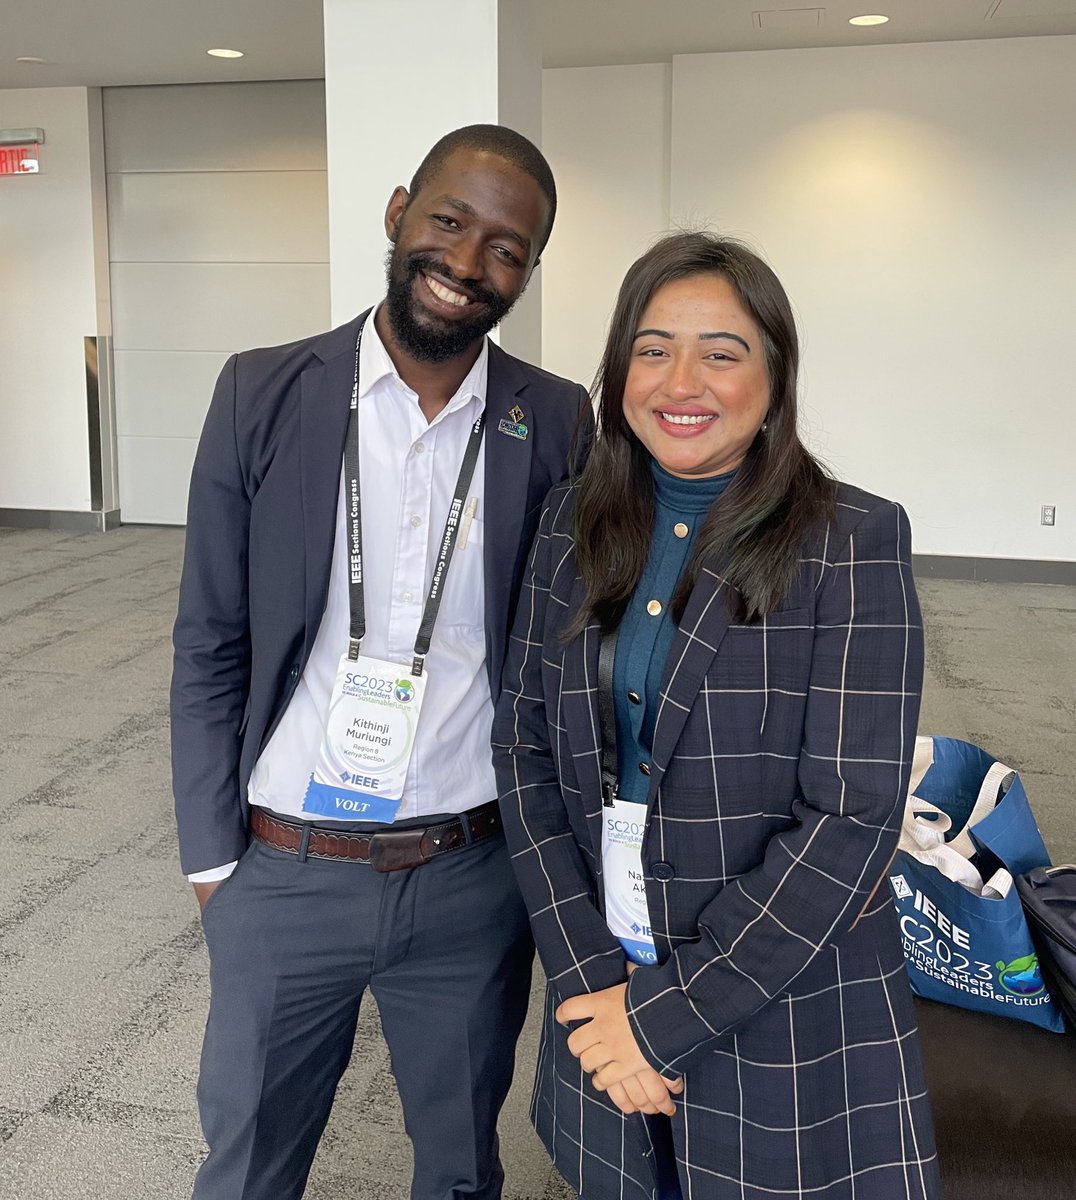 Our Society’s future is bright with these two #changechampions as community organizers and leaders. 👏🏼👏🏽👏🏾👏🏿 #photonics #engineering @ieeeyp @IEEE_SC